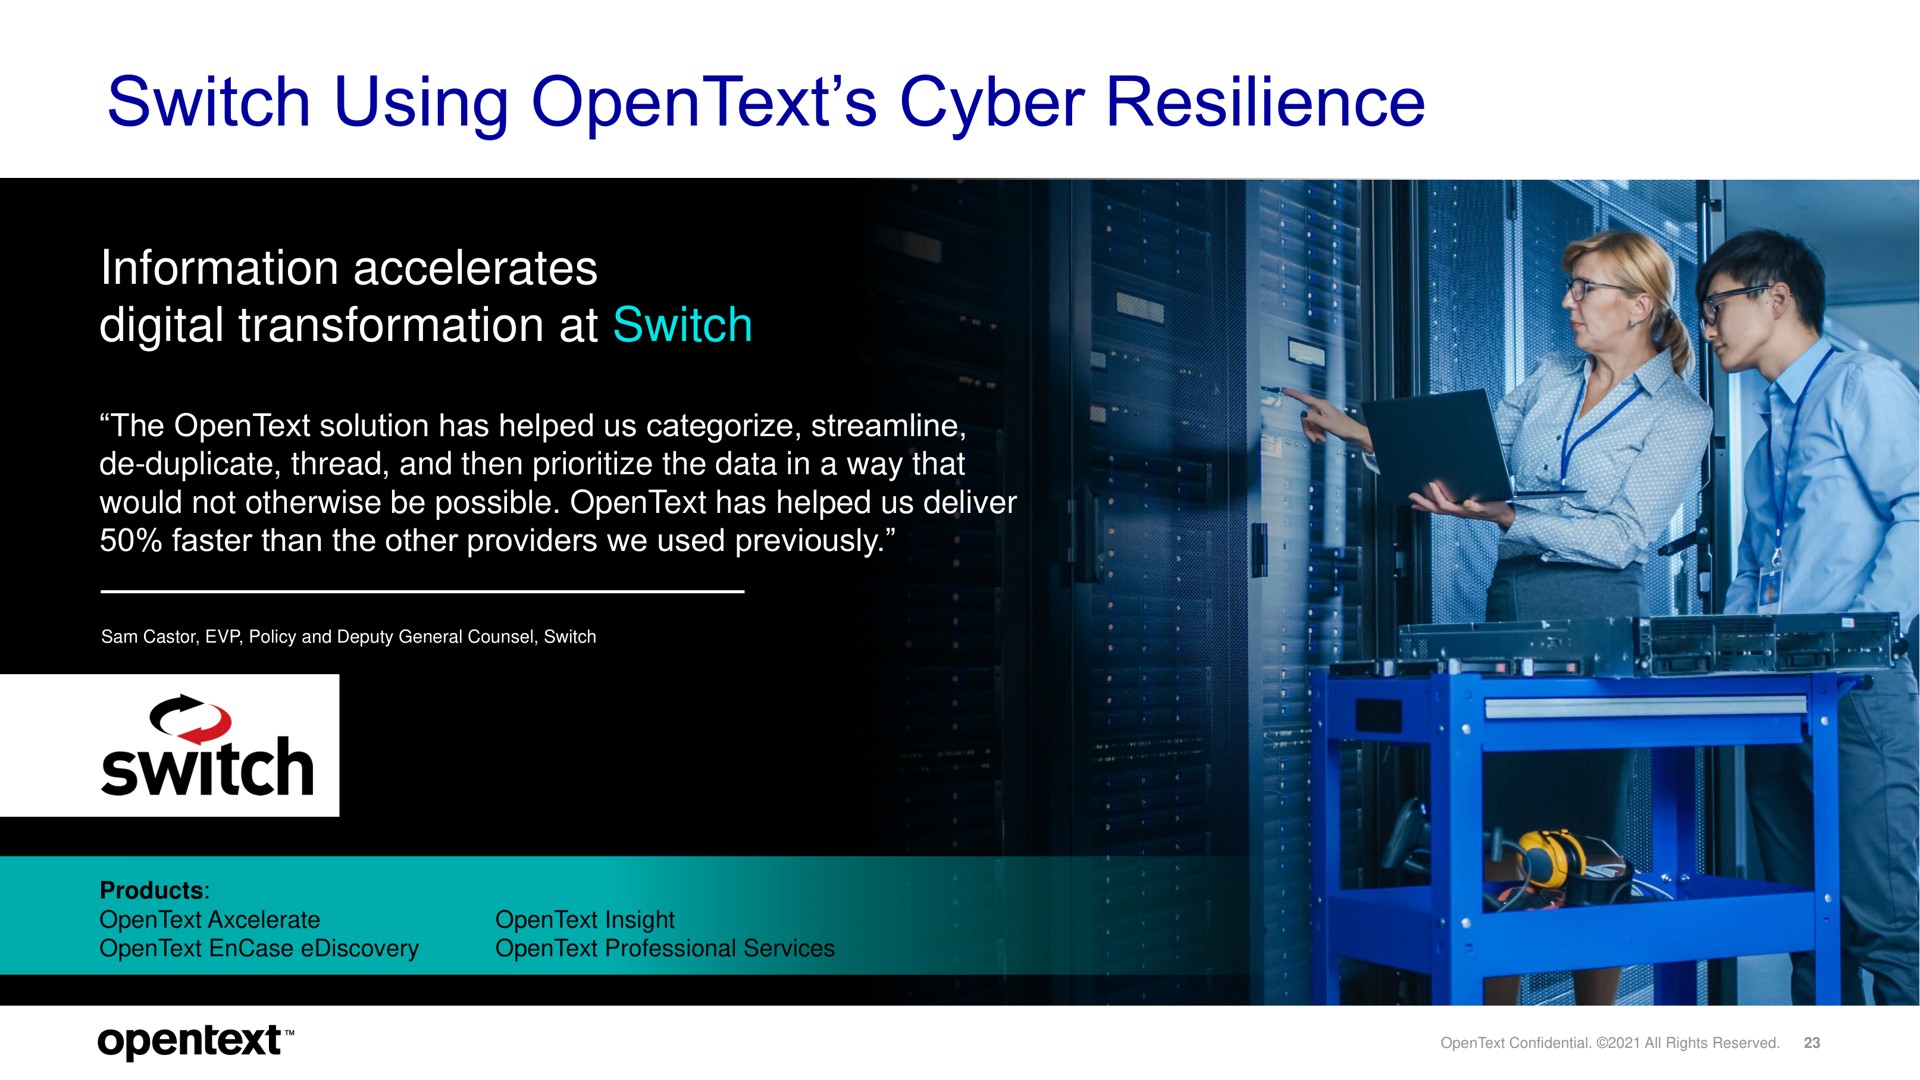 switch using resilience information accelerates digital transformation at switch | OpenText